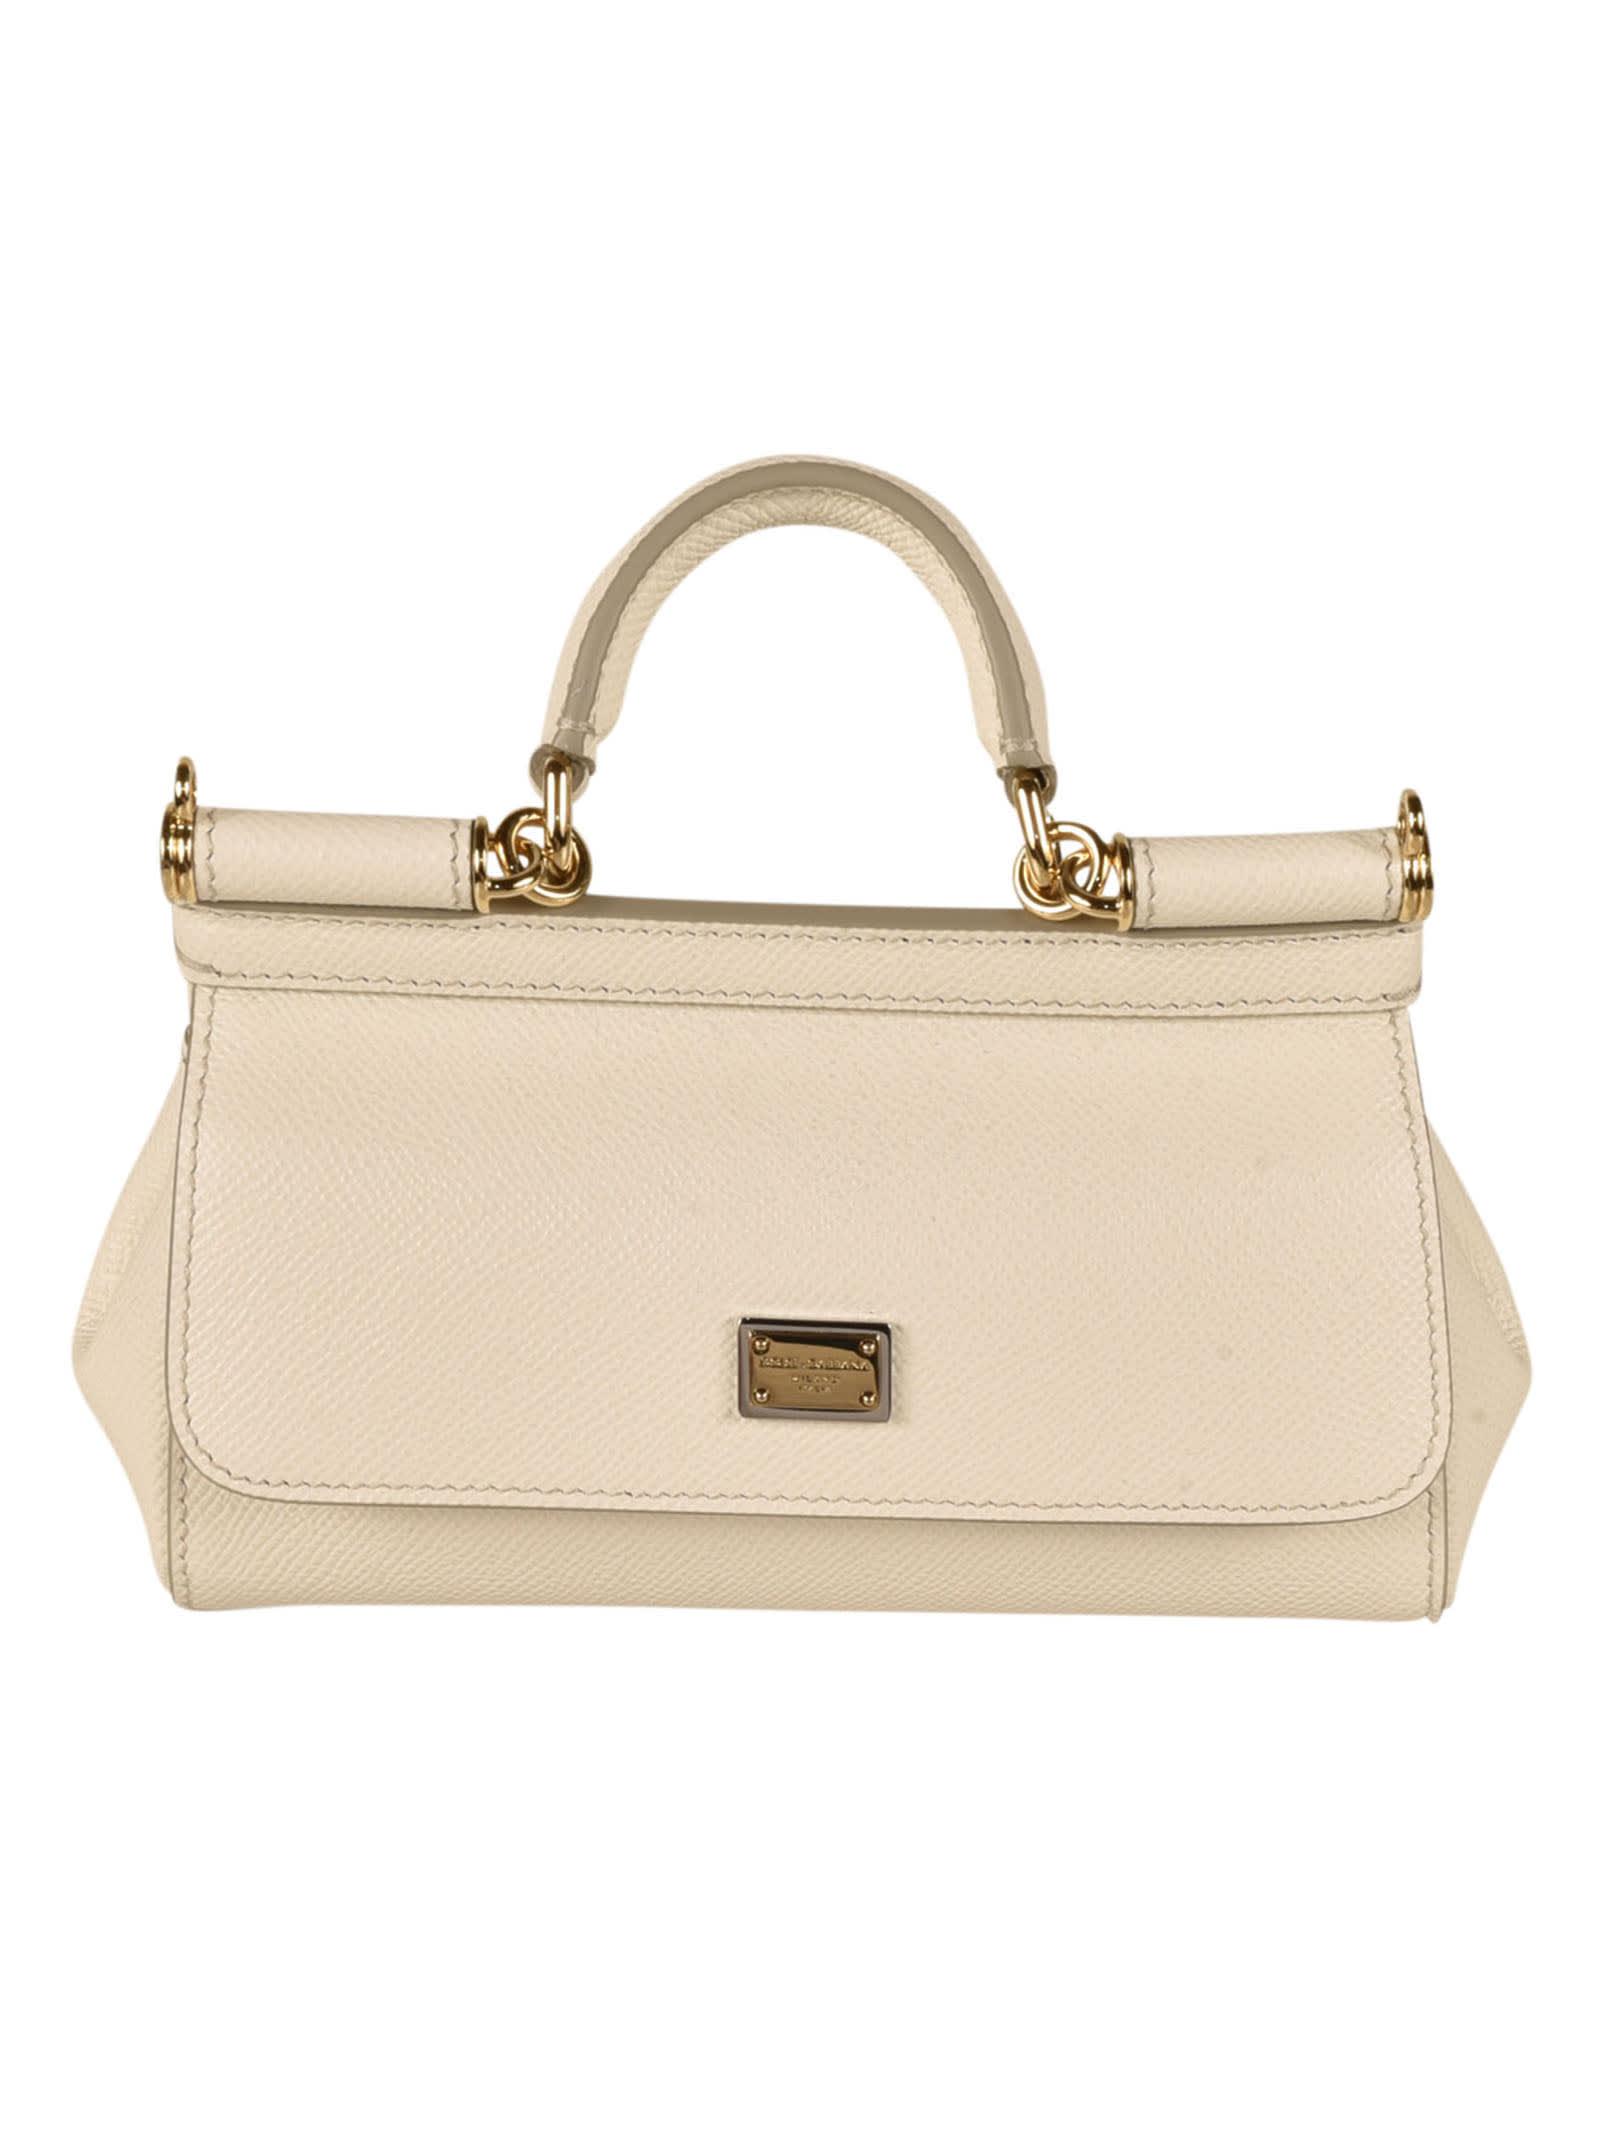 Dolce & Gabbana Miss Sicily Eswest Tote in Natural | Lyst